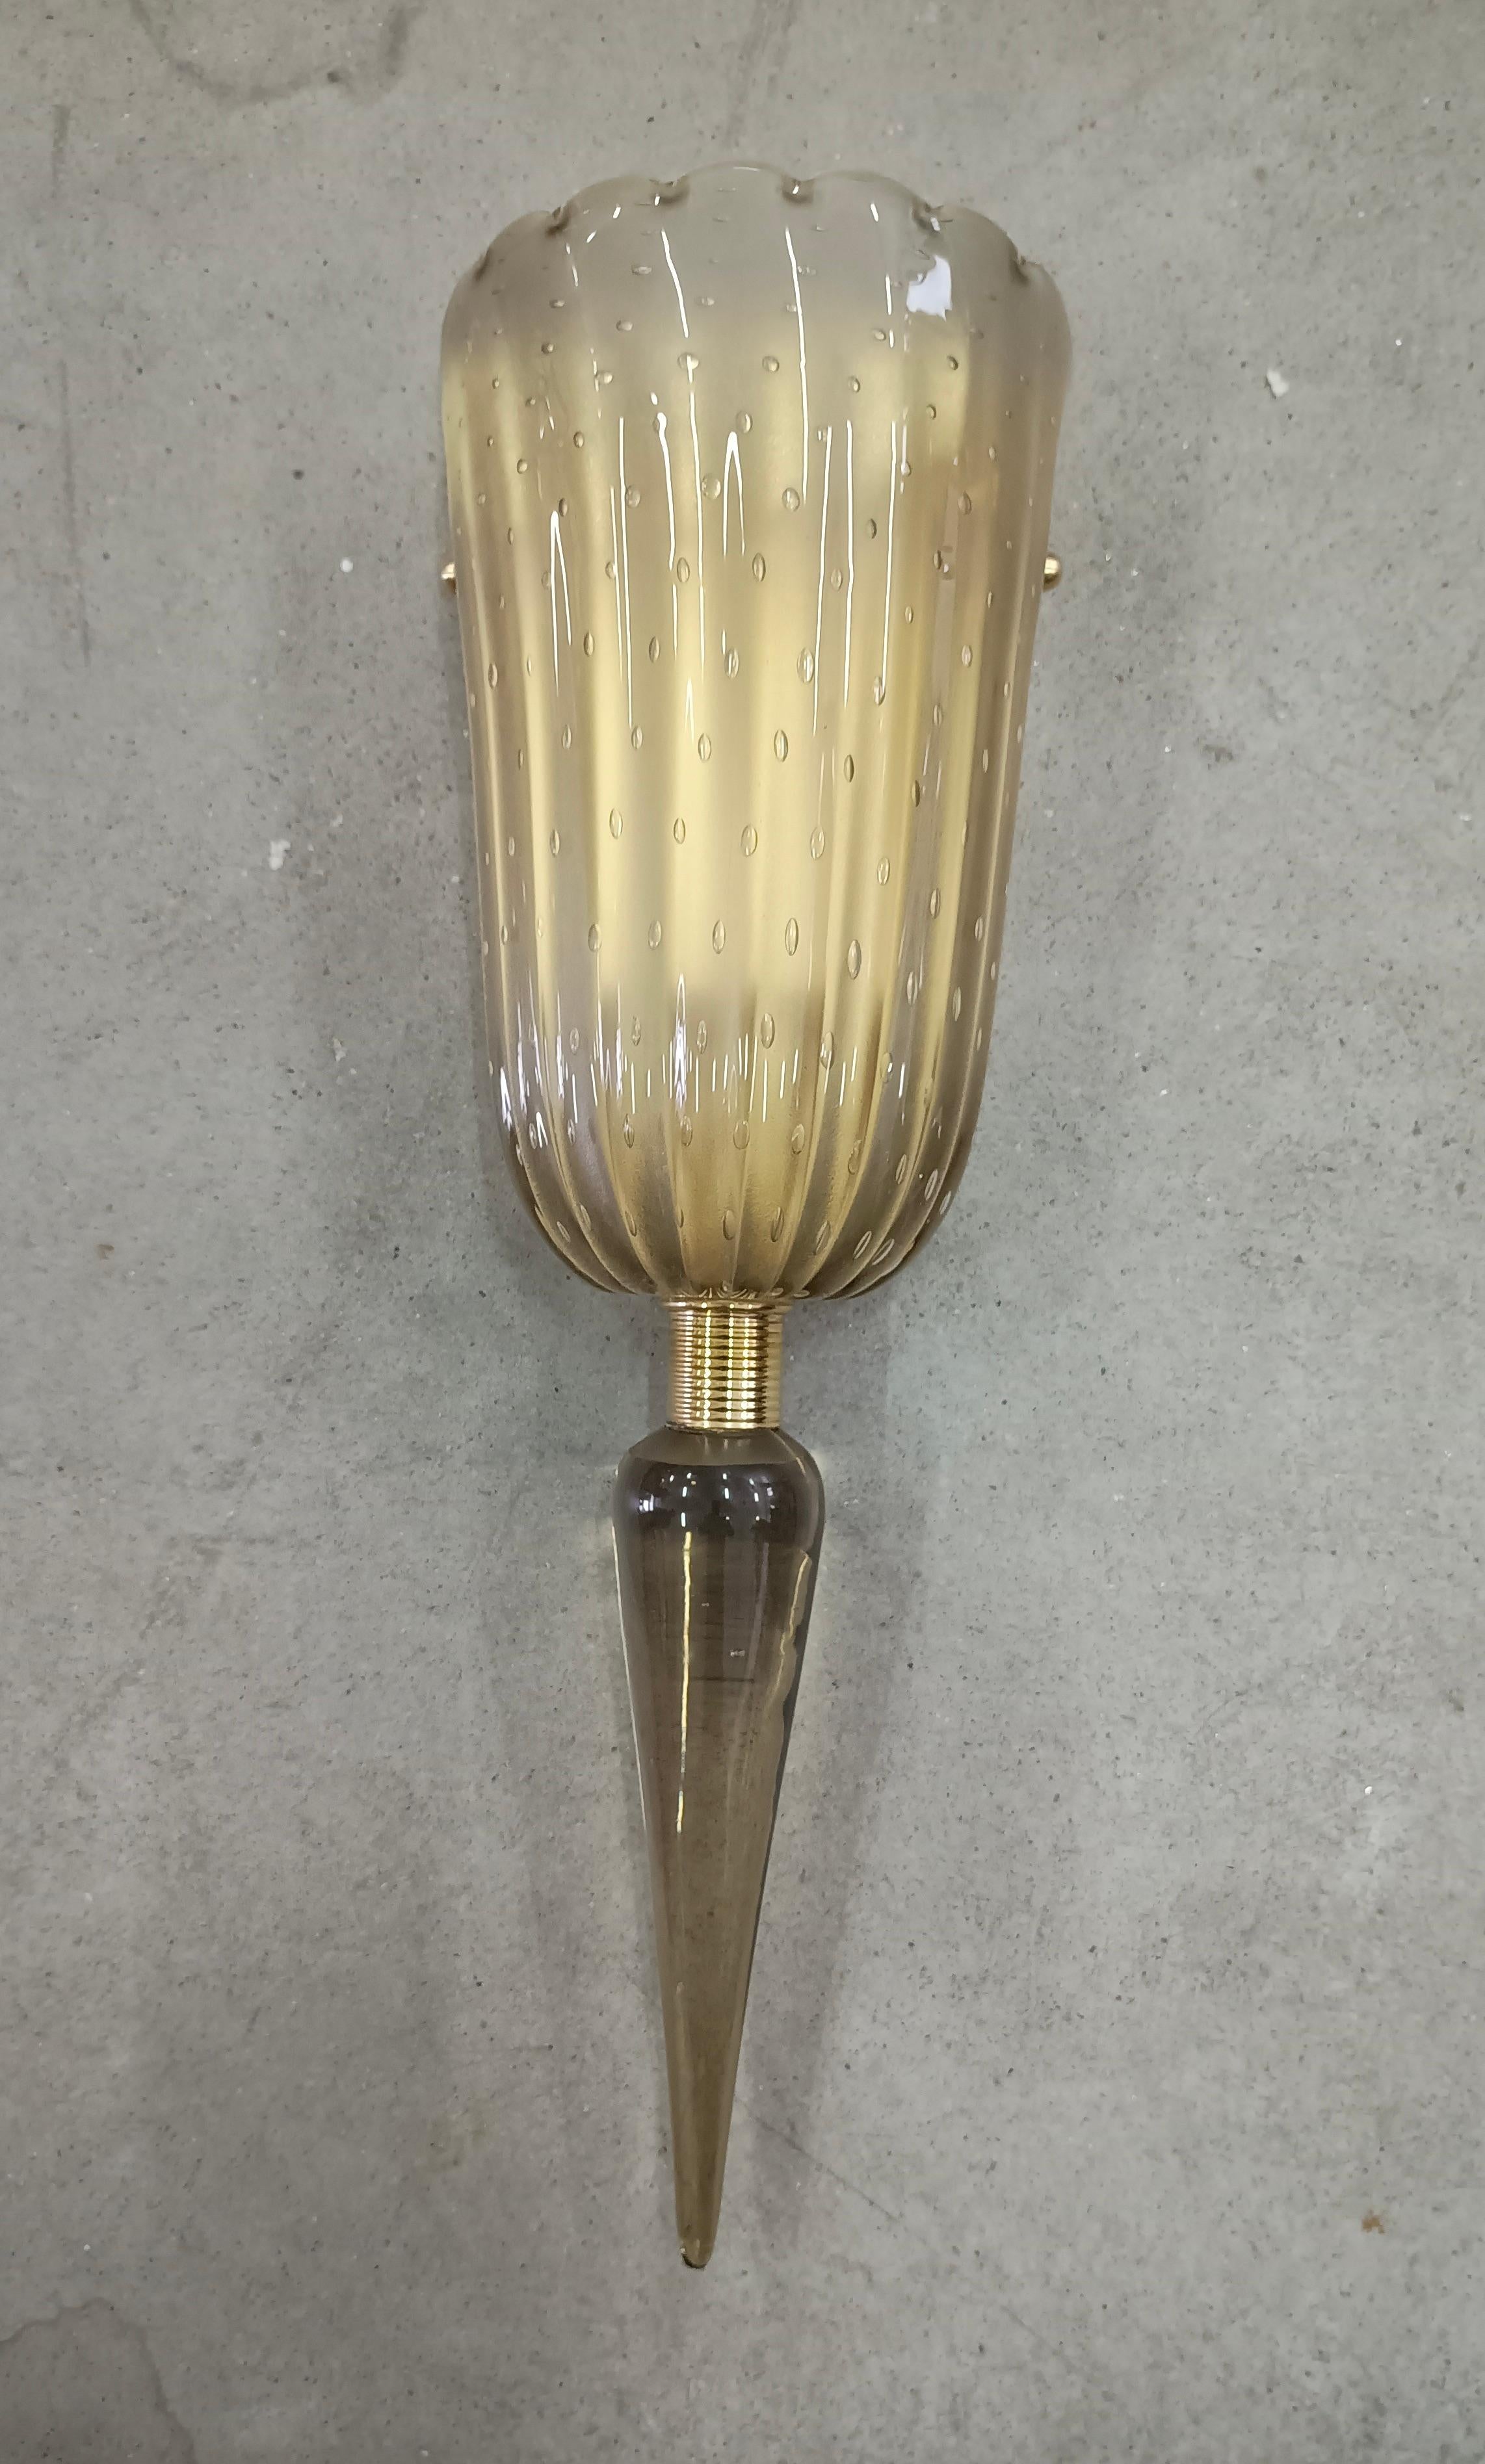 Refined and delicate design for this smoky Murano glass wall light with 